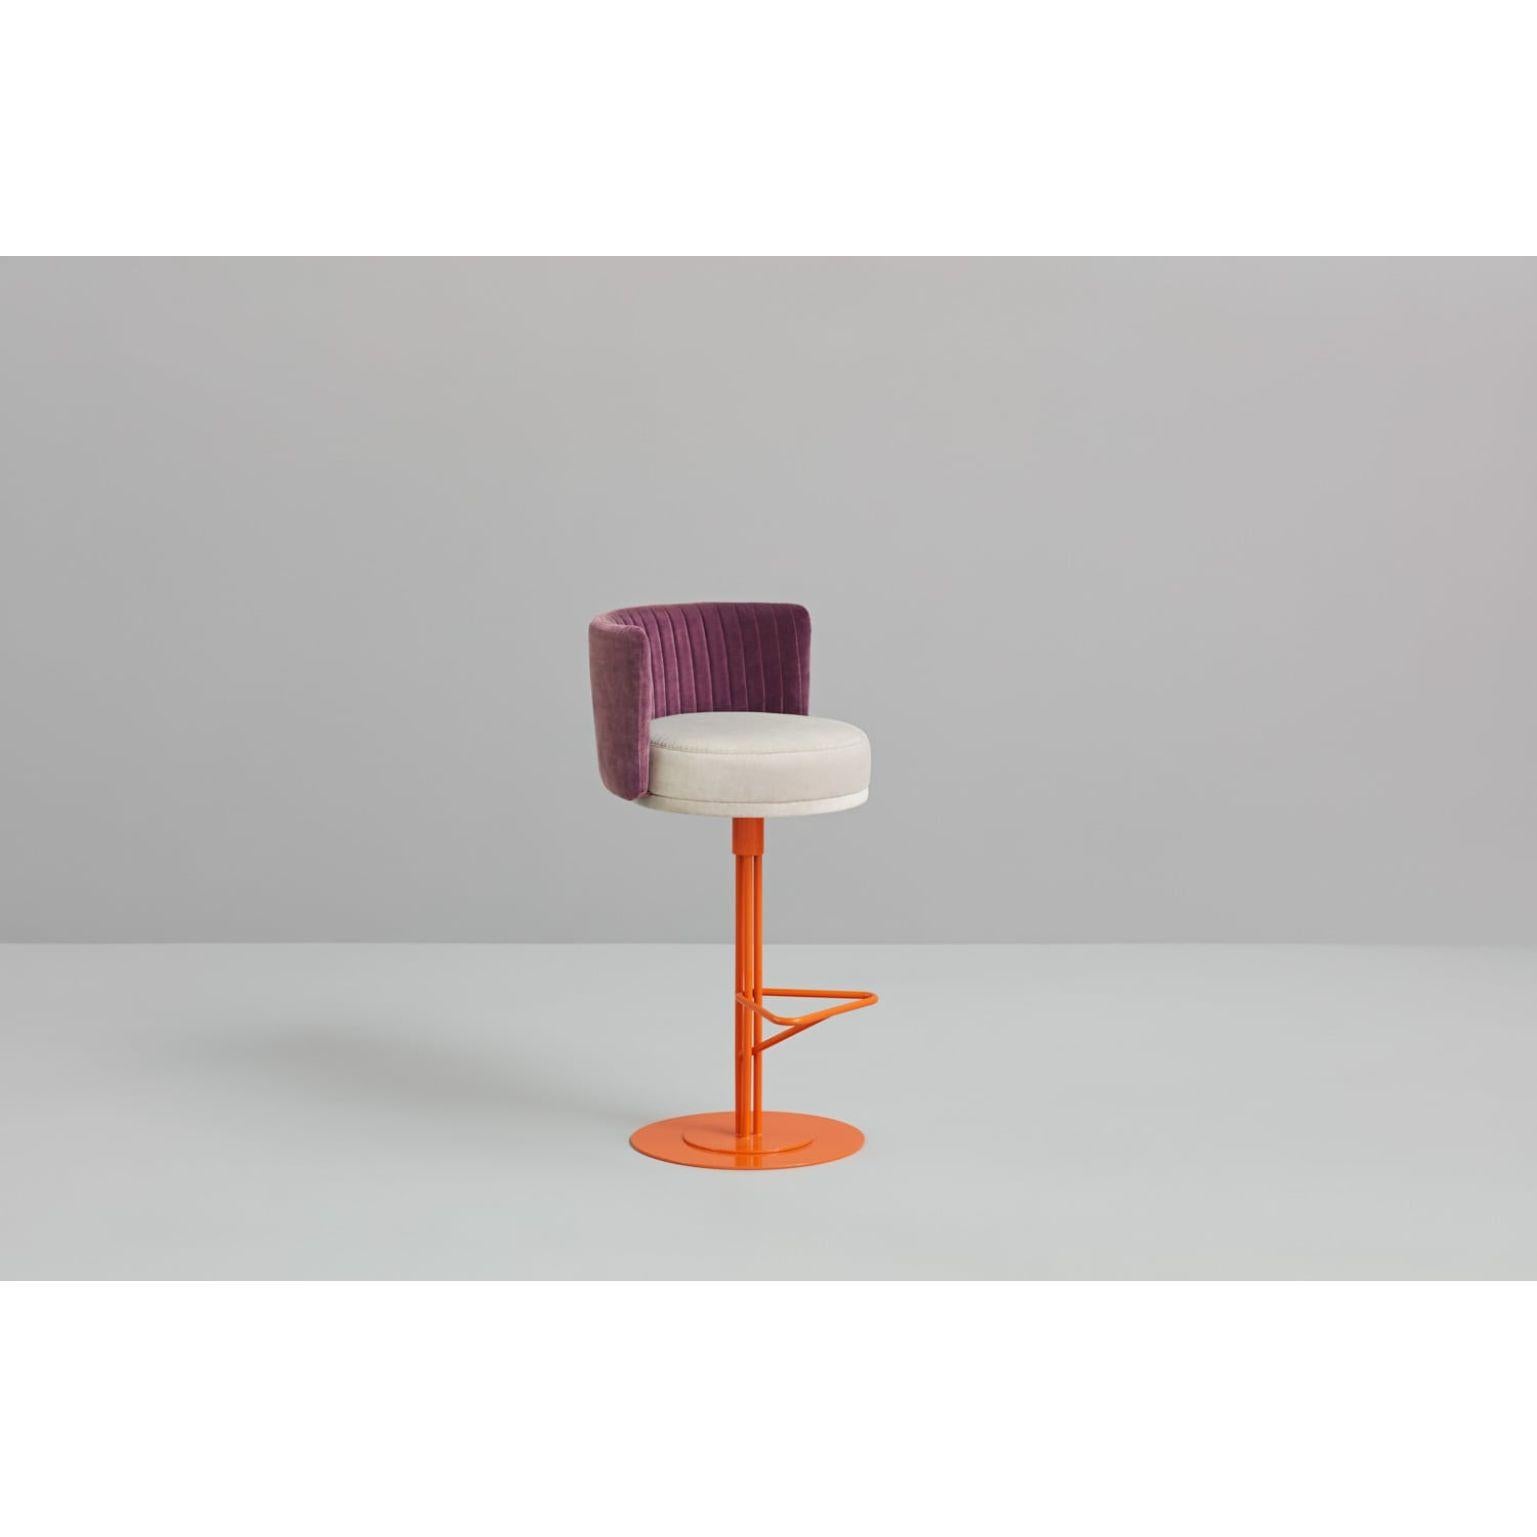 Pair of Colored Athens Stools by Pepe Albargues
Dimensions: W 52, D 55, H 101, Seat 80
Materials: Iron structure and seat particles board
Foam CMHR (high resilience and flame retardant) for all our cushion filling systems
Painted iron